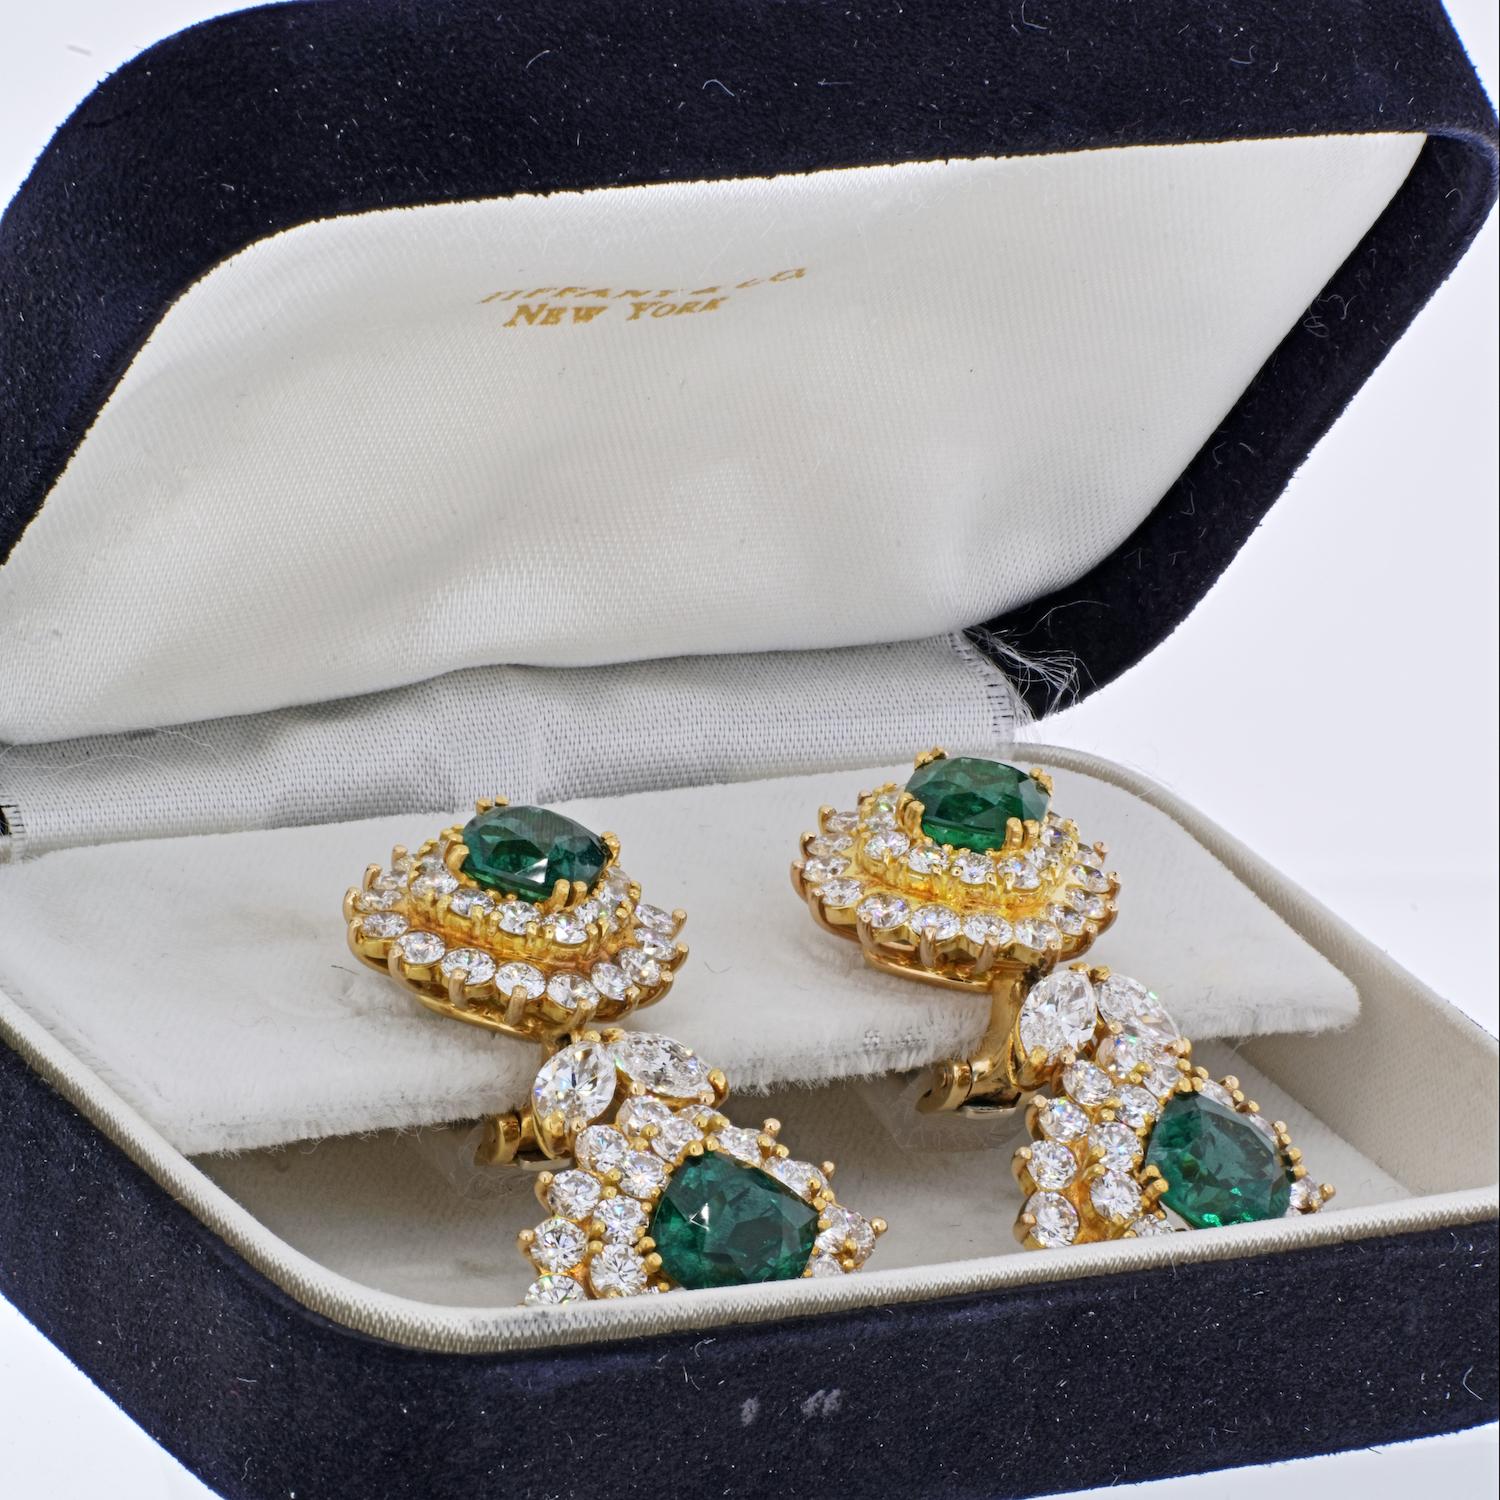 Tiffany & Co. Emerald and diamond drop earrings set in 18k solid gold. 

Centered by four perfectly matched green Zambian Emeralds totaling over 9 Carats, accented by 114 round-brilliant cut and marquise diamonds totaling over 13 Carats, and set in